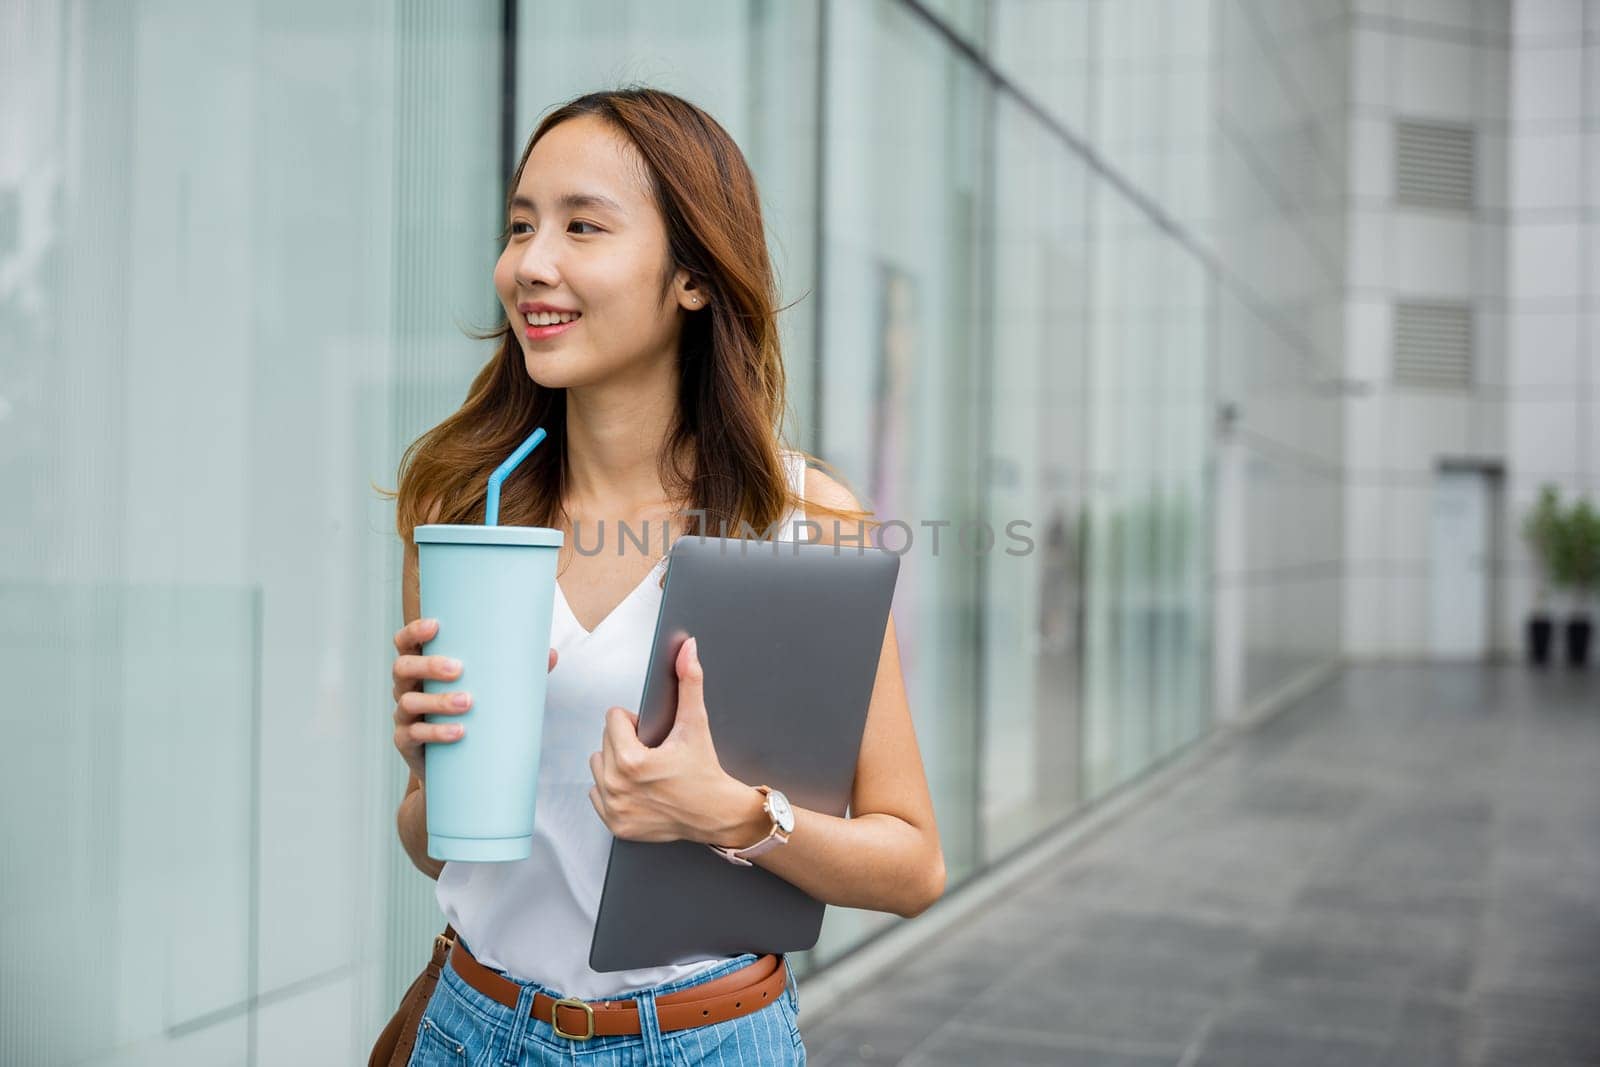 A female entrepreneur with a laptop and tumbler mug water at a shopping mall, using technology to stay connected and productive while on the go.